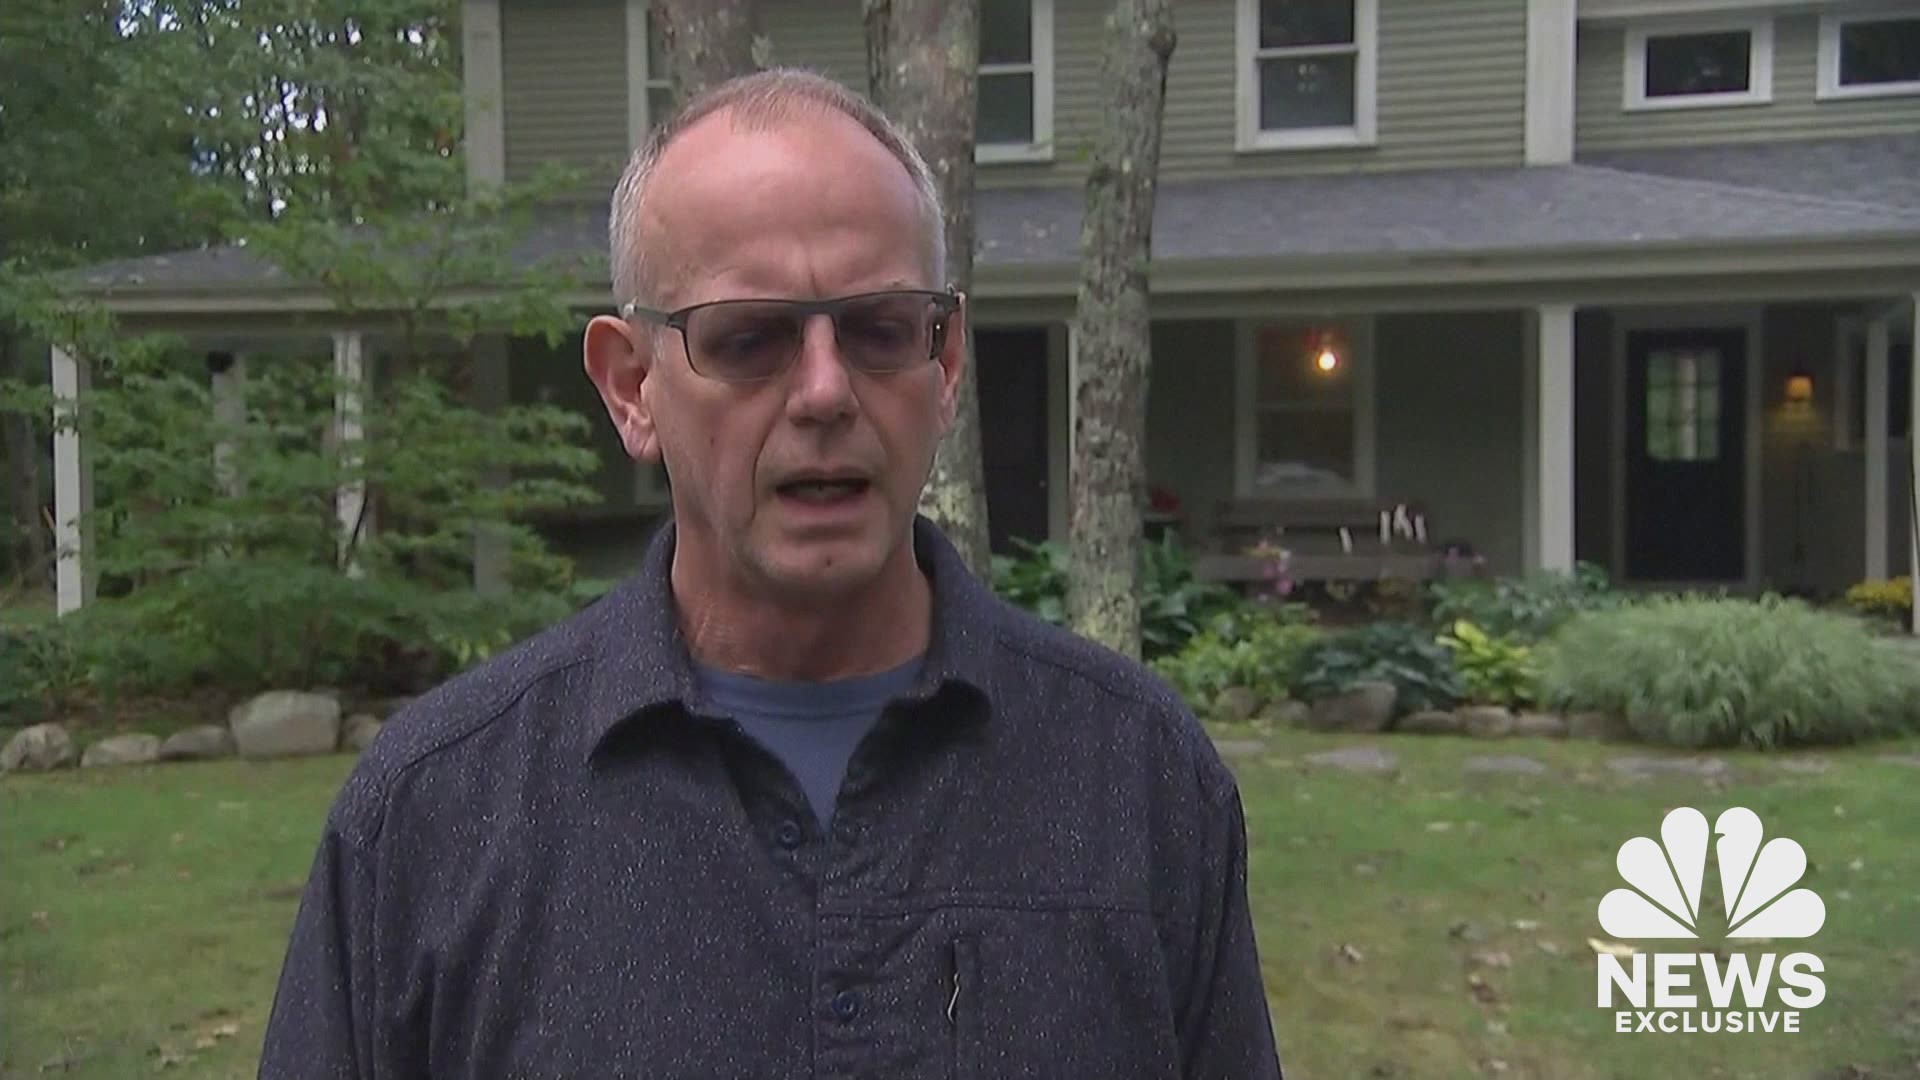 Missing Maine woman Kristin Westra's husband, Jay Westra, spoke exclusively to NBC News